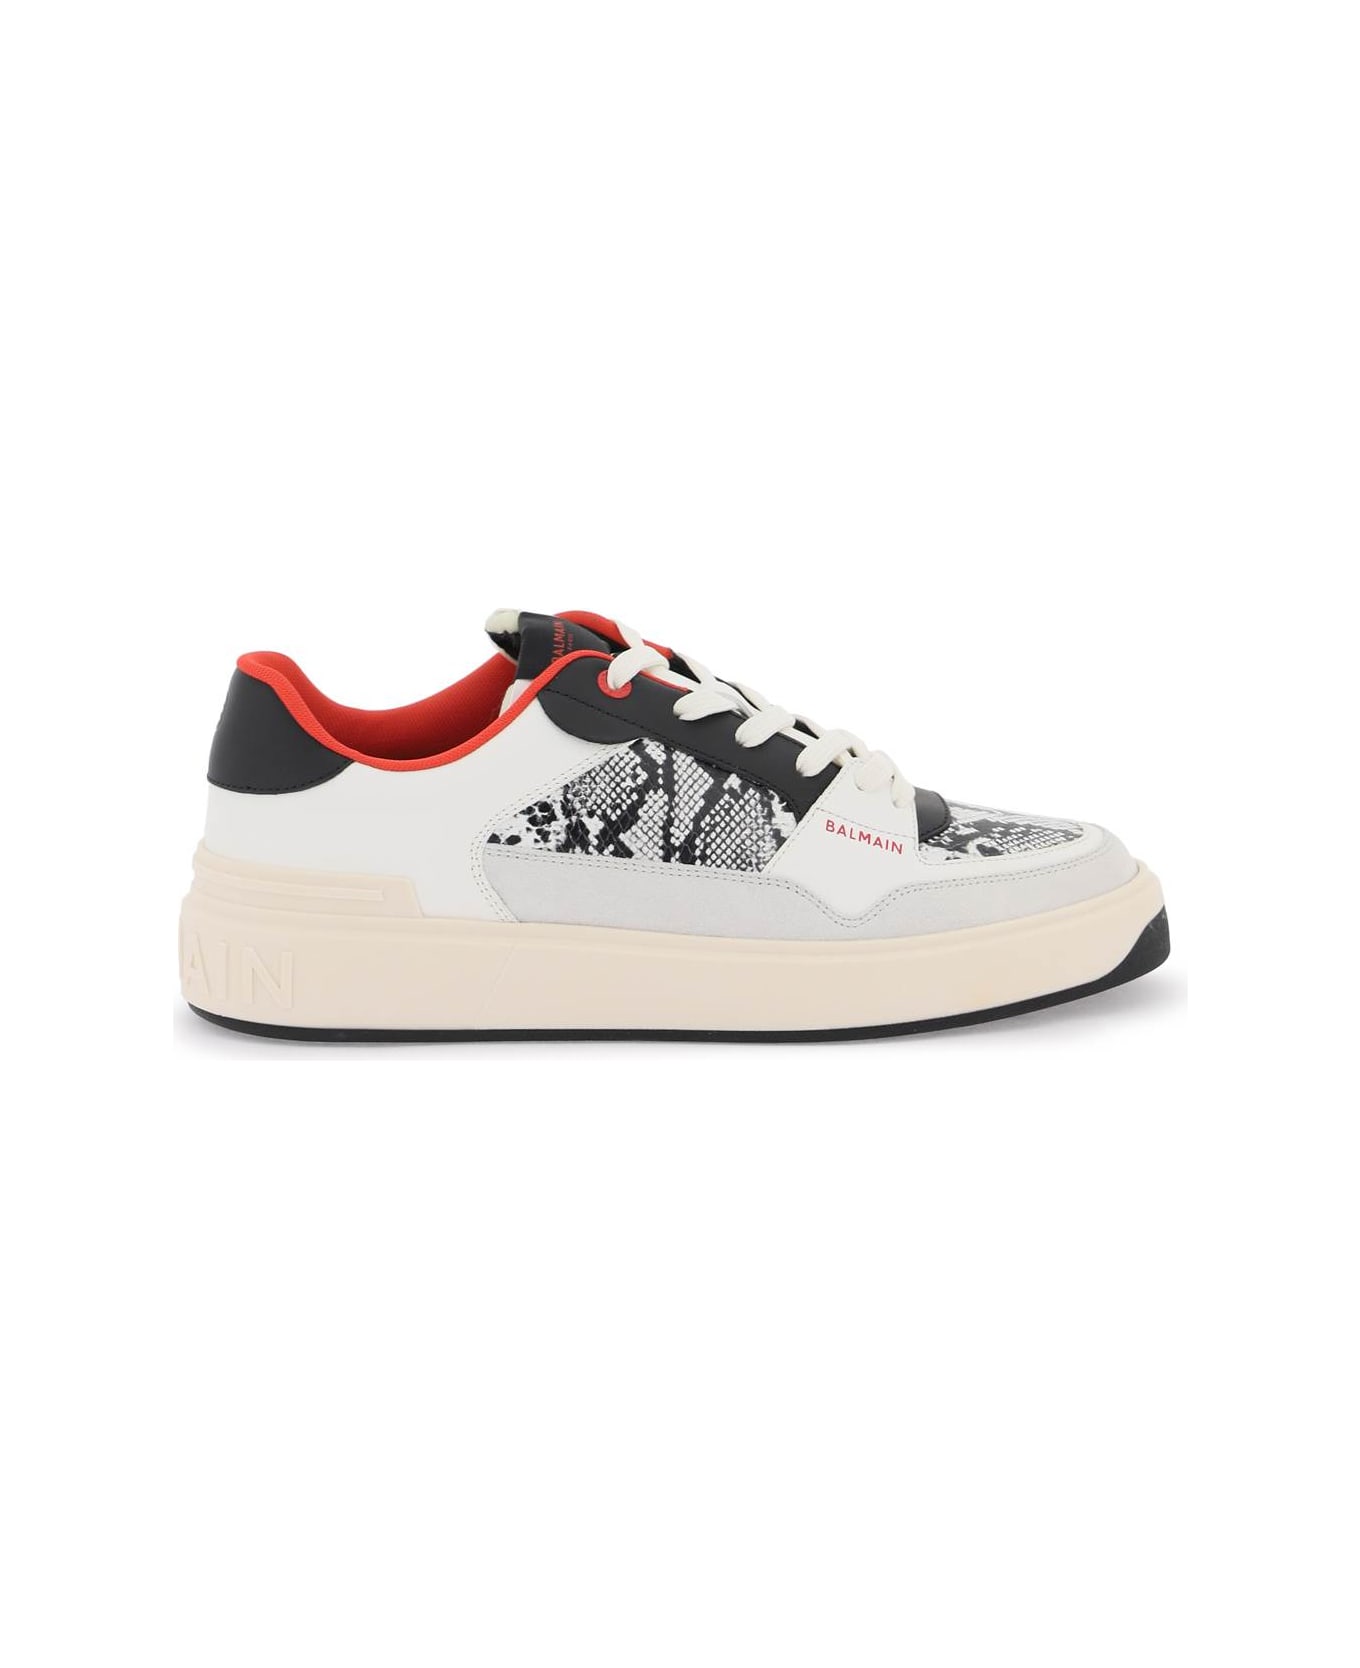 Balmain B-court Flip Sneakers In Python-effect Leather - GRIS ROUGE VIF (White)